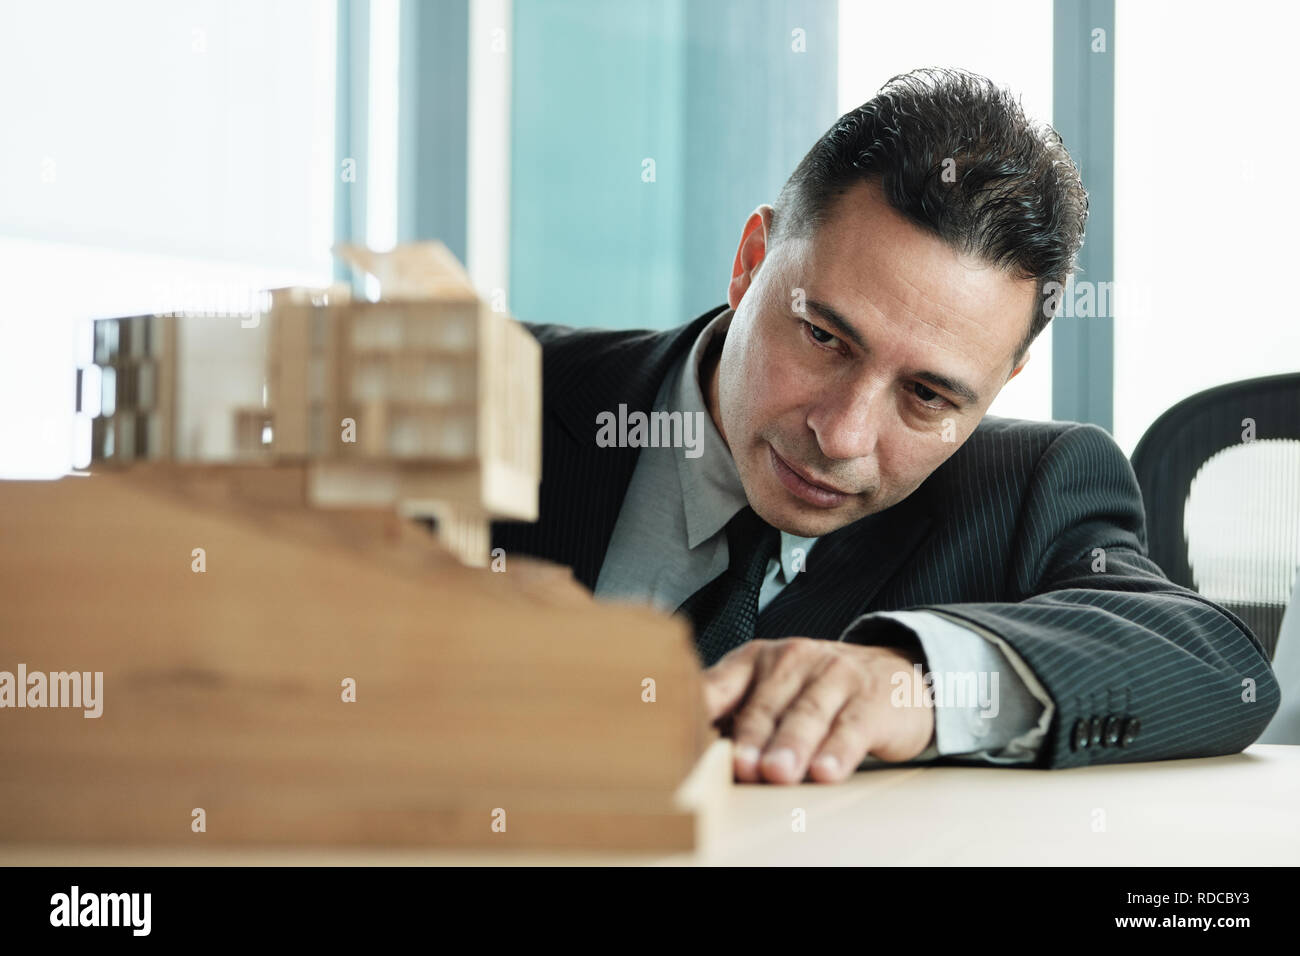 Confident Businessman Looking At Architecture Miniature House Project Stock Photo